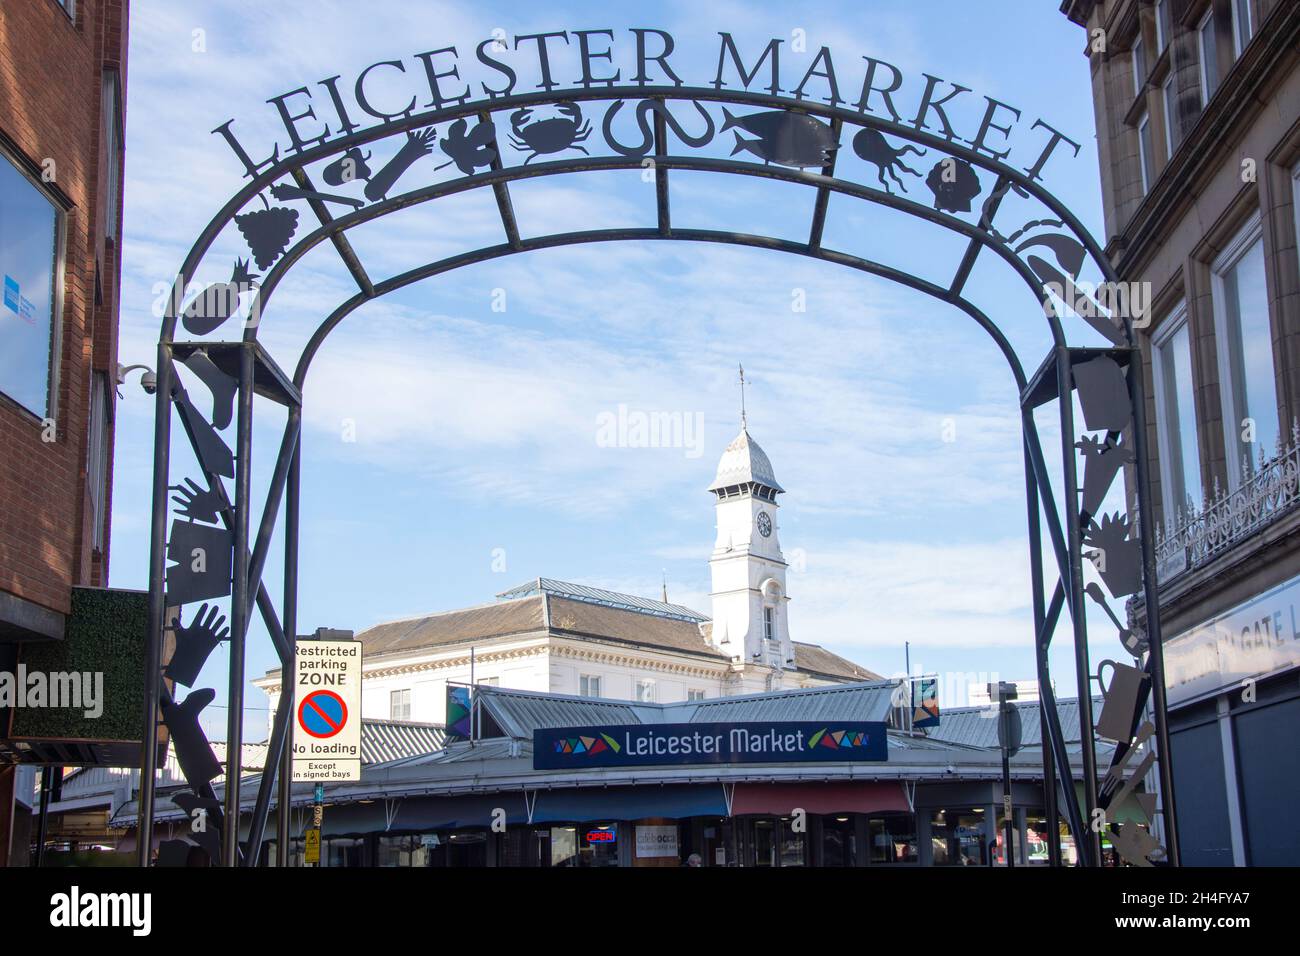 Sign at entrance to Leicester Market, Market Square, City Centre, City of Leicester, Leicestershire, England, United Kingdom Stock Photo